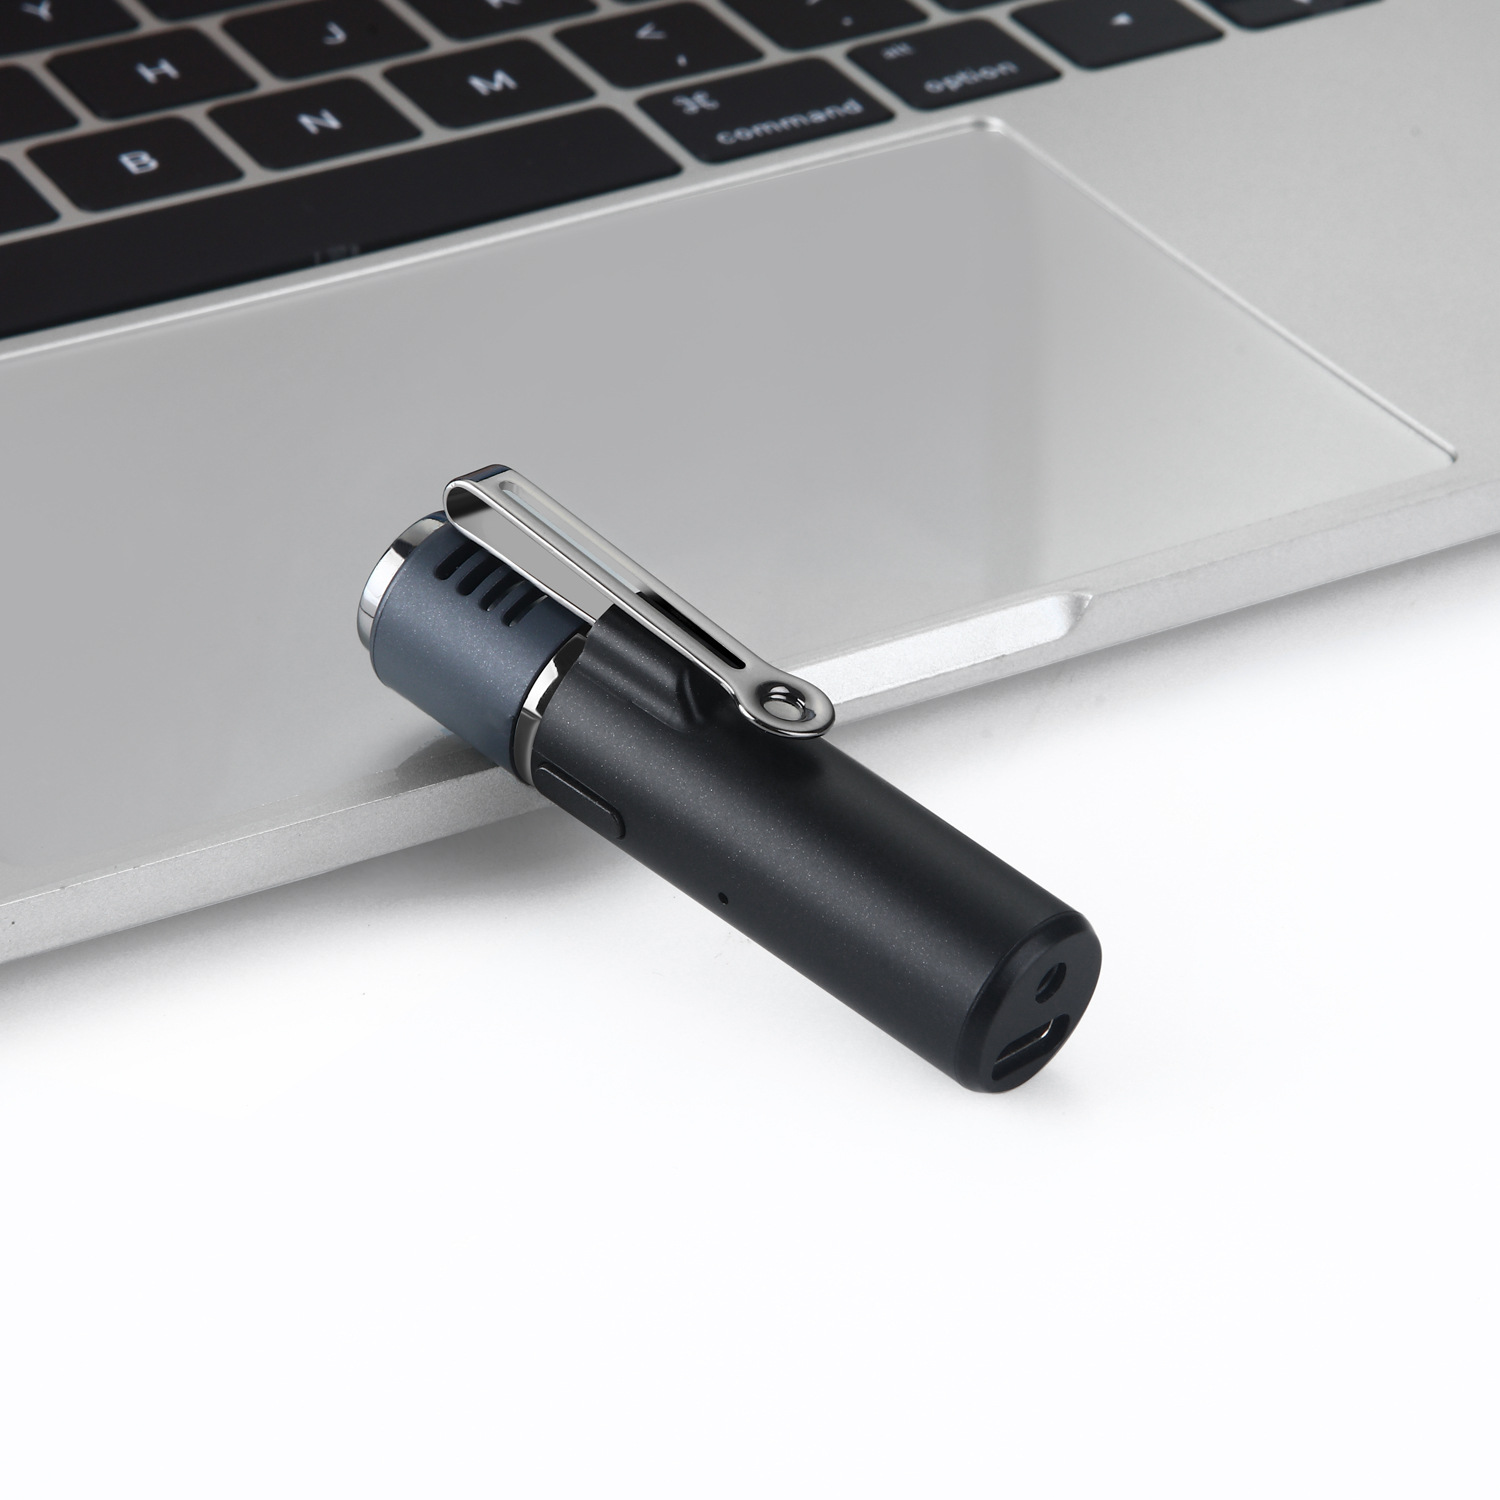 Use Smart Microphones For Live Speech